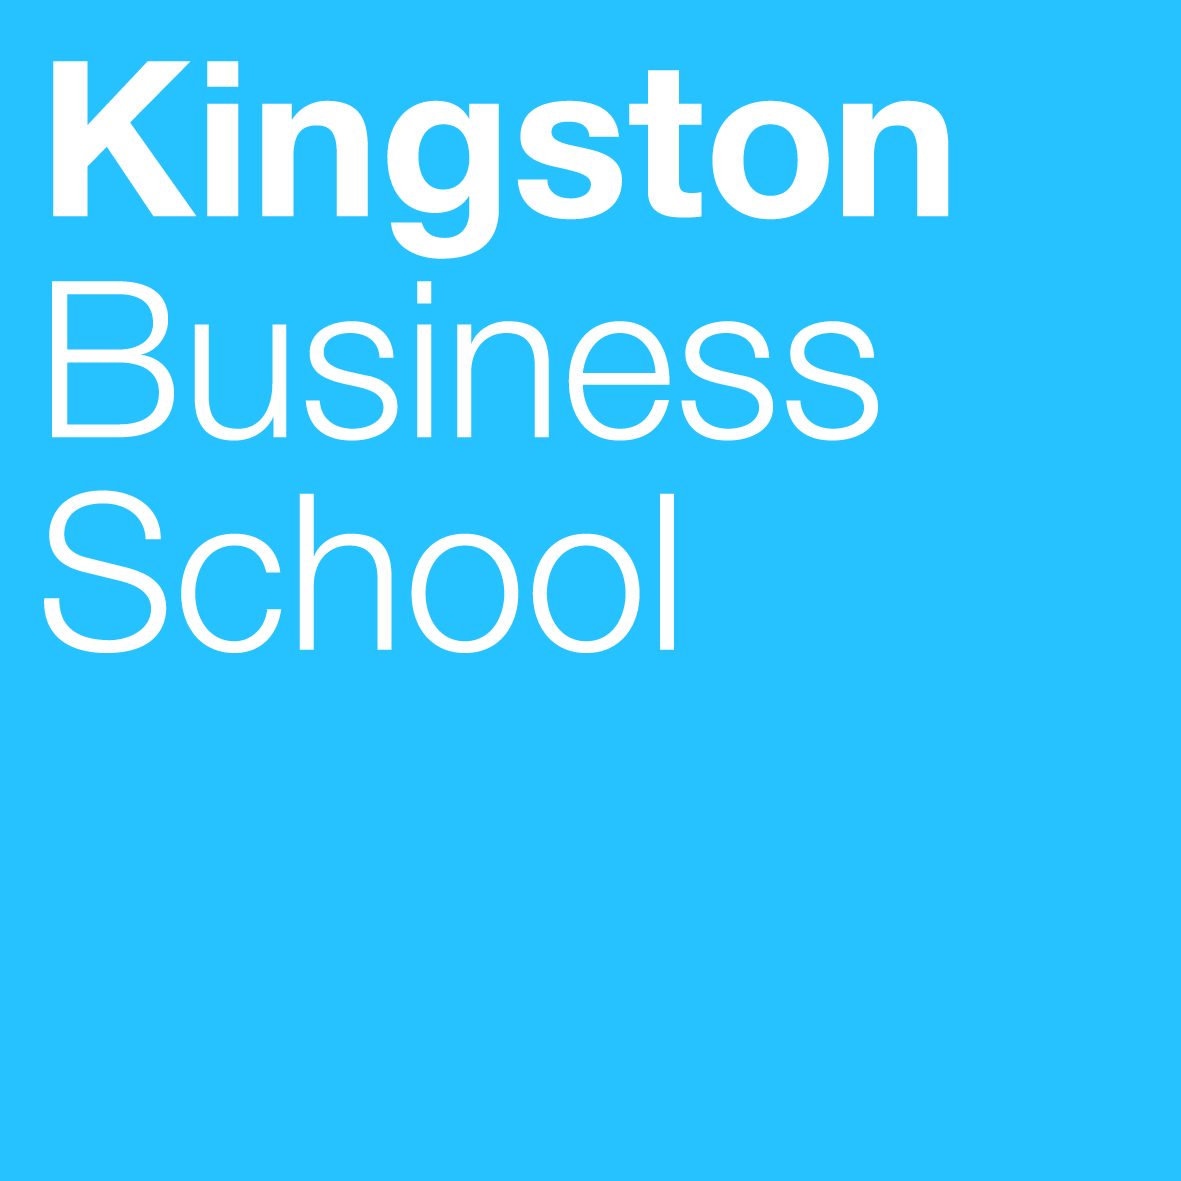 https://staffspace.kingston.ac.uk/teams/bl/si/flt/shared%20documents/logos%20-%20faculty%20and%20university/kingston%20business%20school%20logo%20(high%20res).jpg